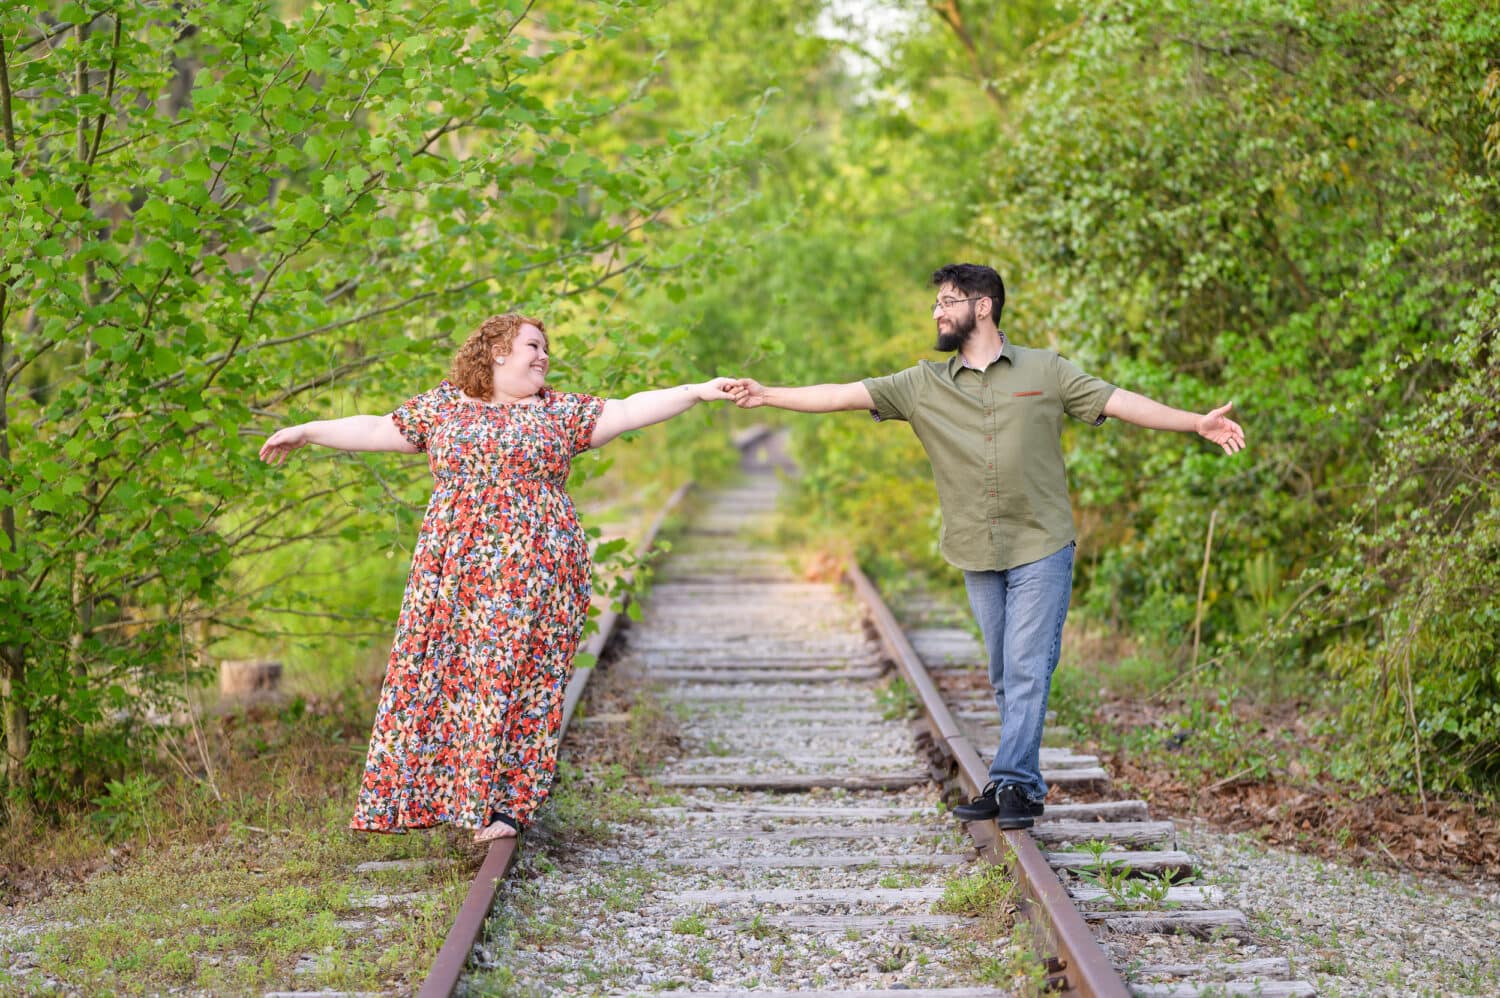 Walking down the train tracks together - Conway Riverwalk